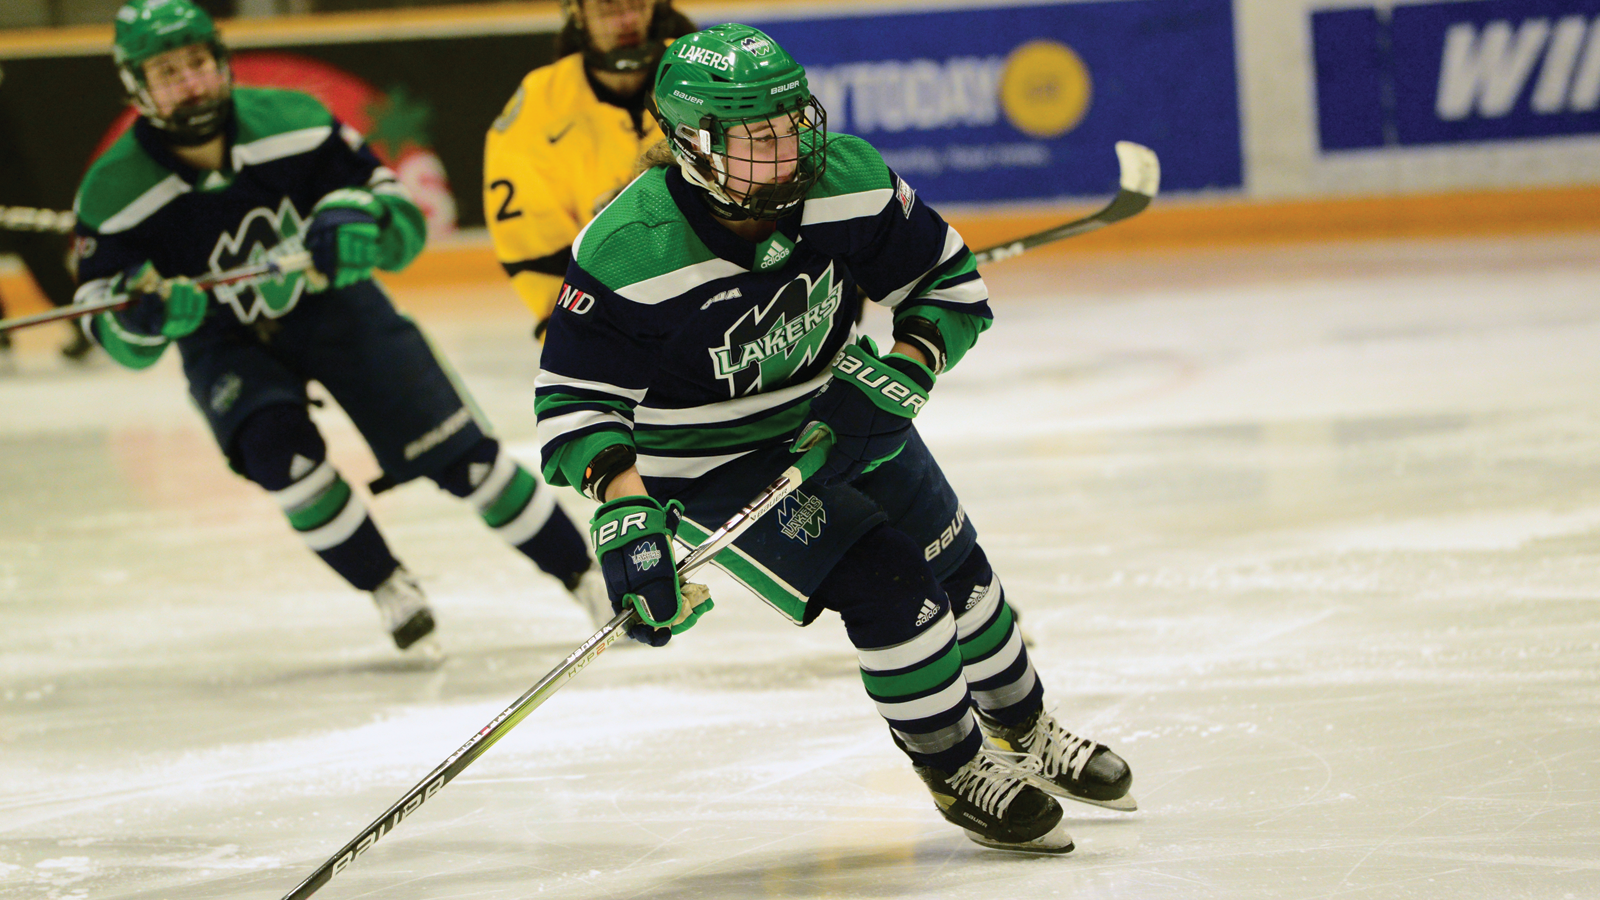 Nipissing women's hockey player Abby Lunney skating on the ice during a game